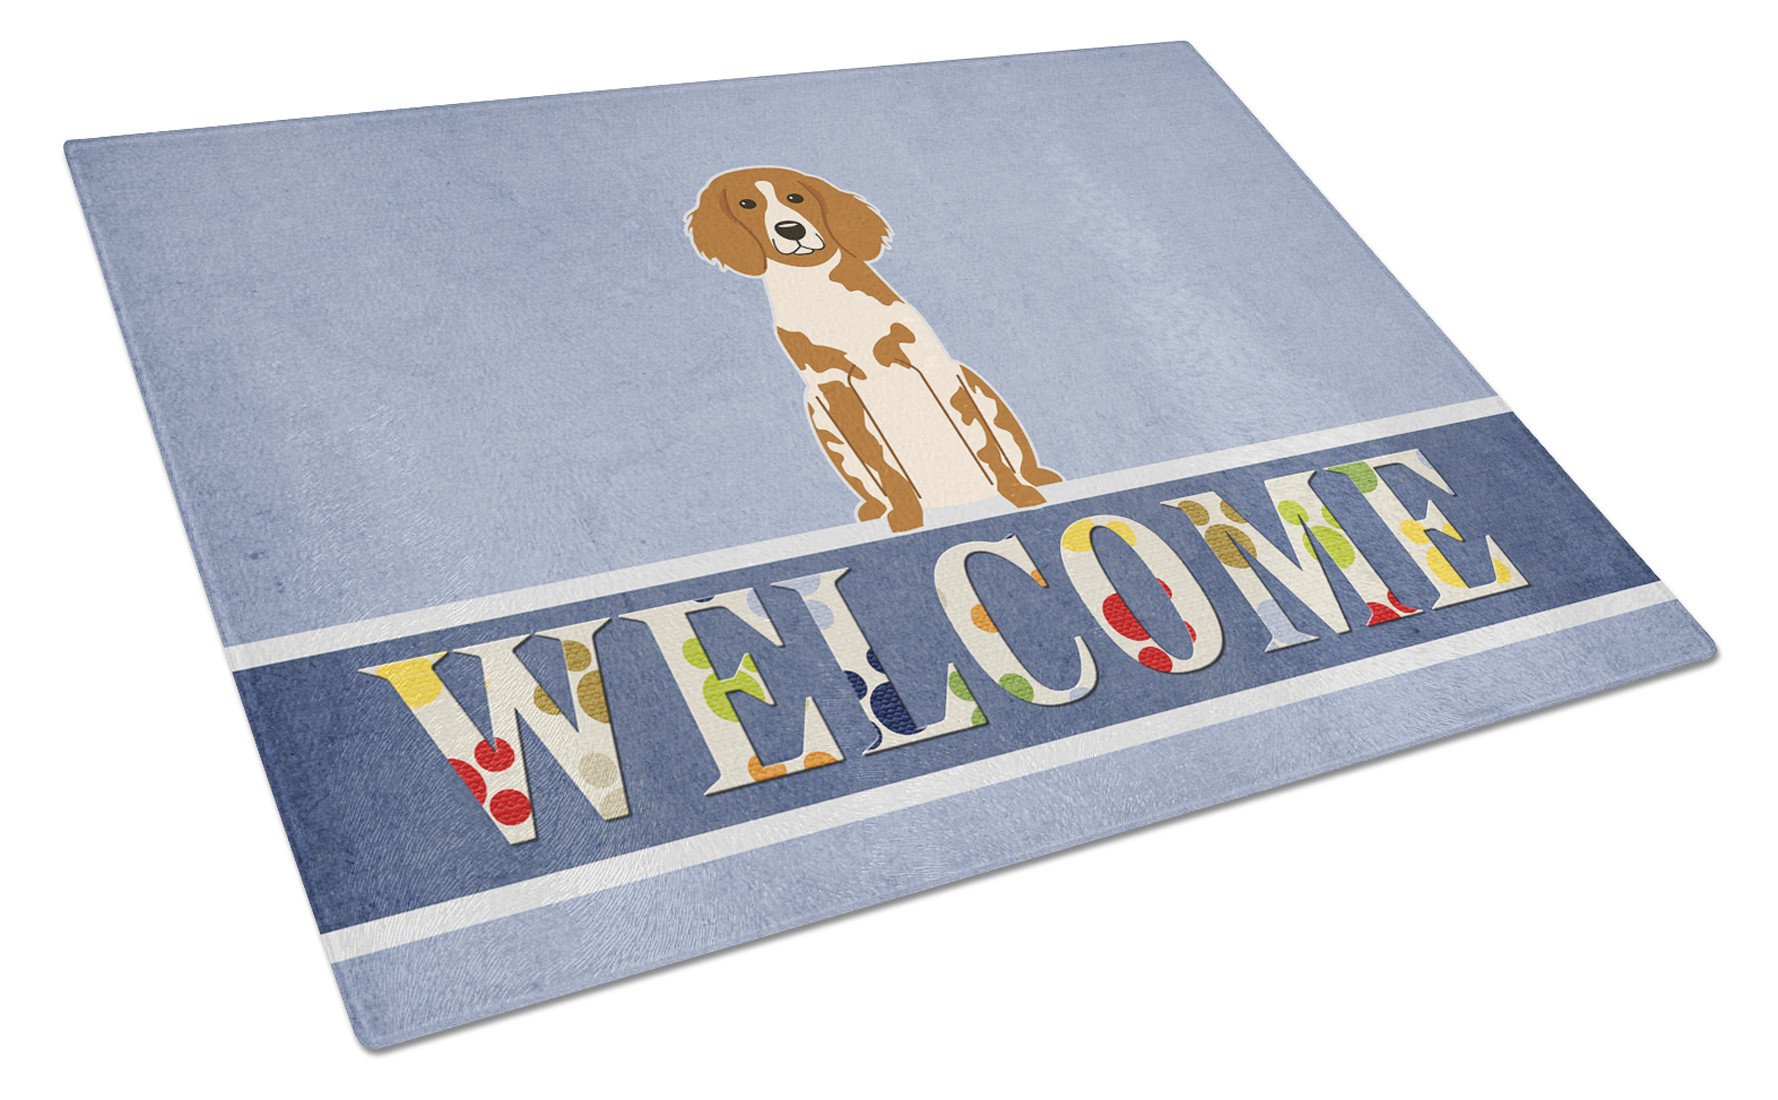 Brittany Spaniel Welcome Glass Cutting Board Large BB5653LCB by Caroline's Treasures